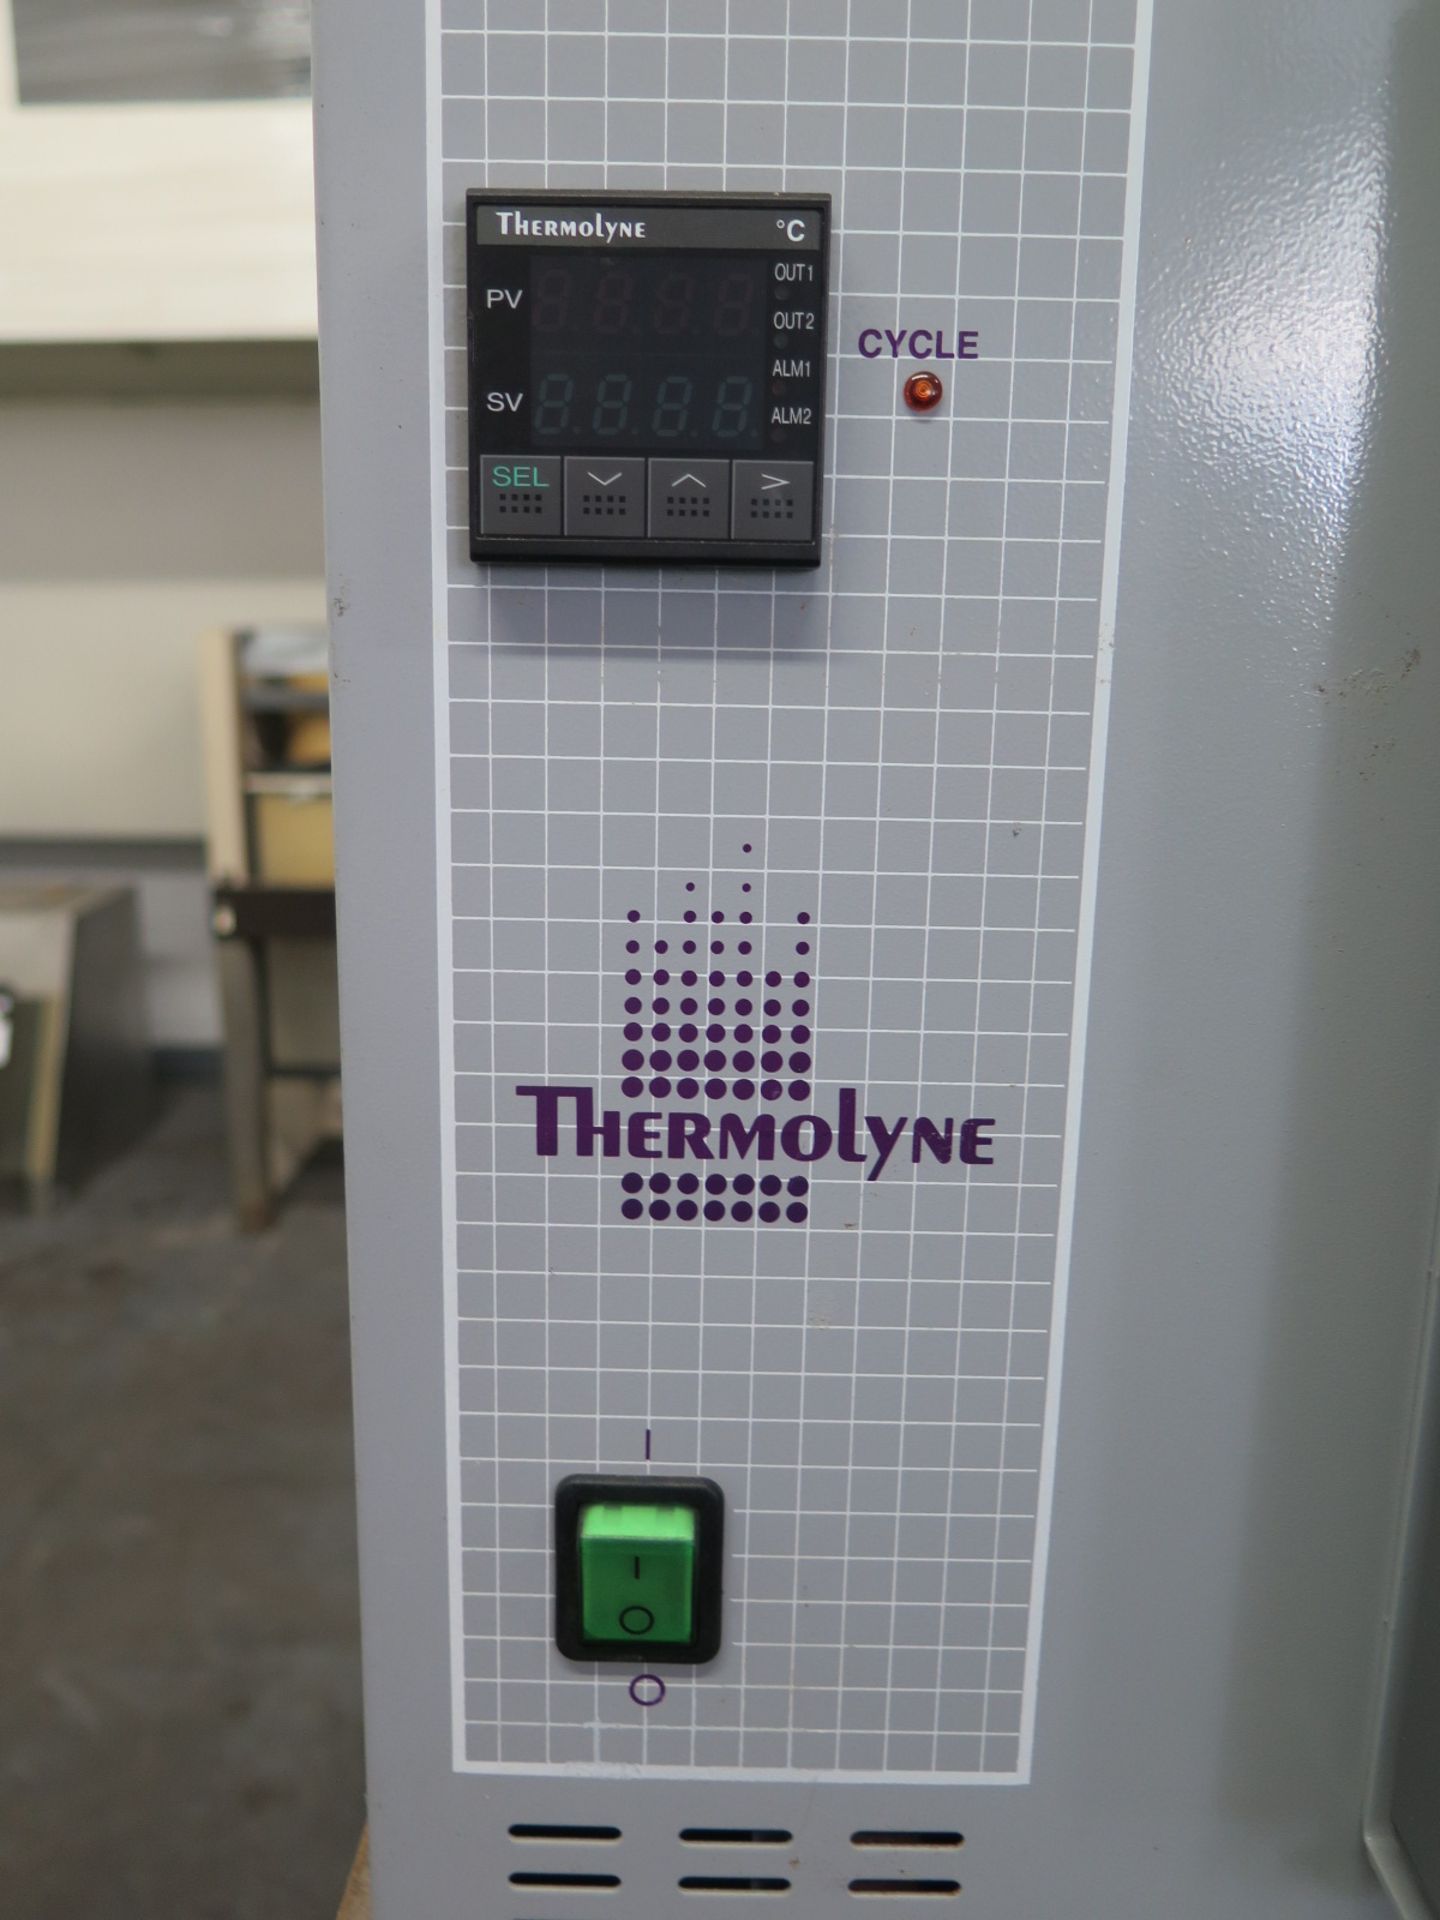 Barnstead / Thermolyne mdl. F62735-80 Electric Furnace w/ Digital Controls, 120 Volts - Image 2 of 5